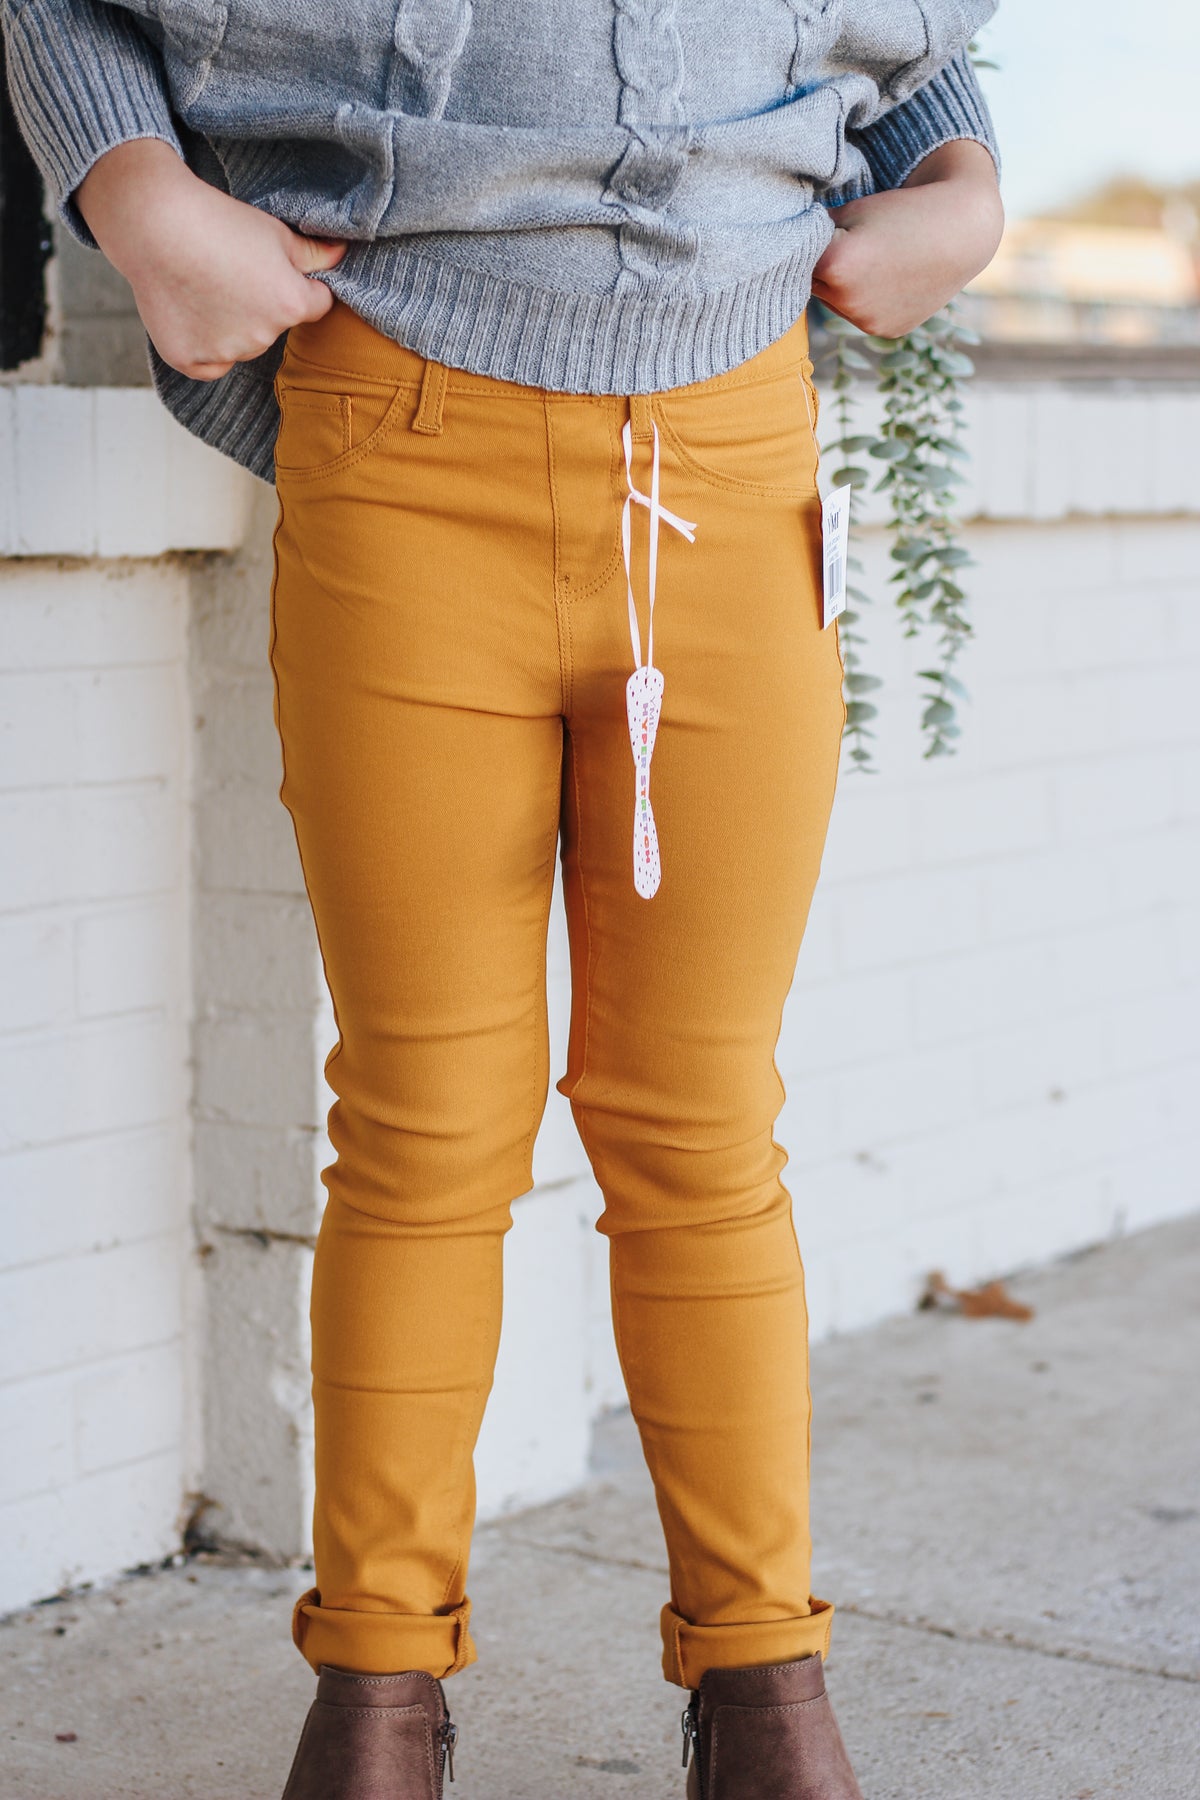 Youth Mustard Skinny Jeans